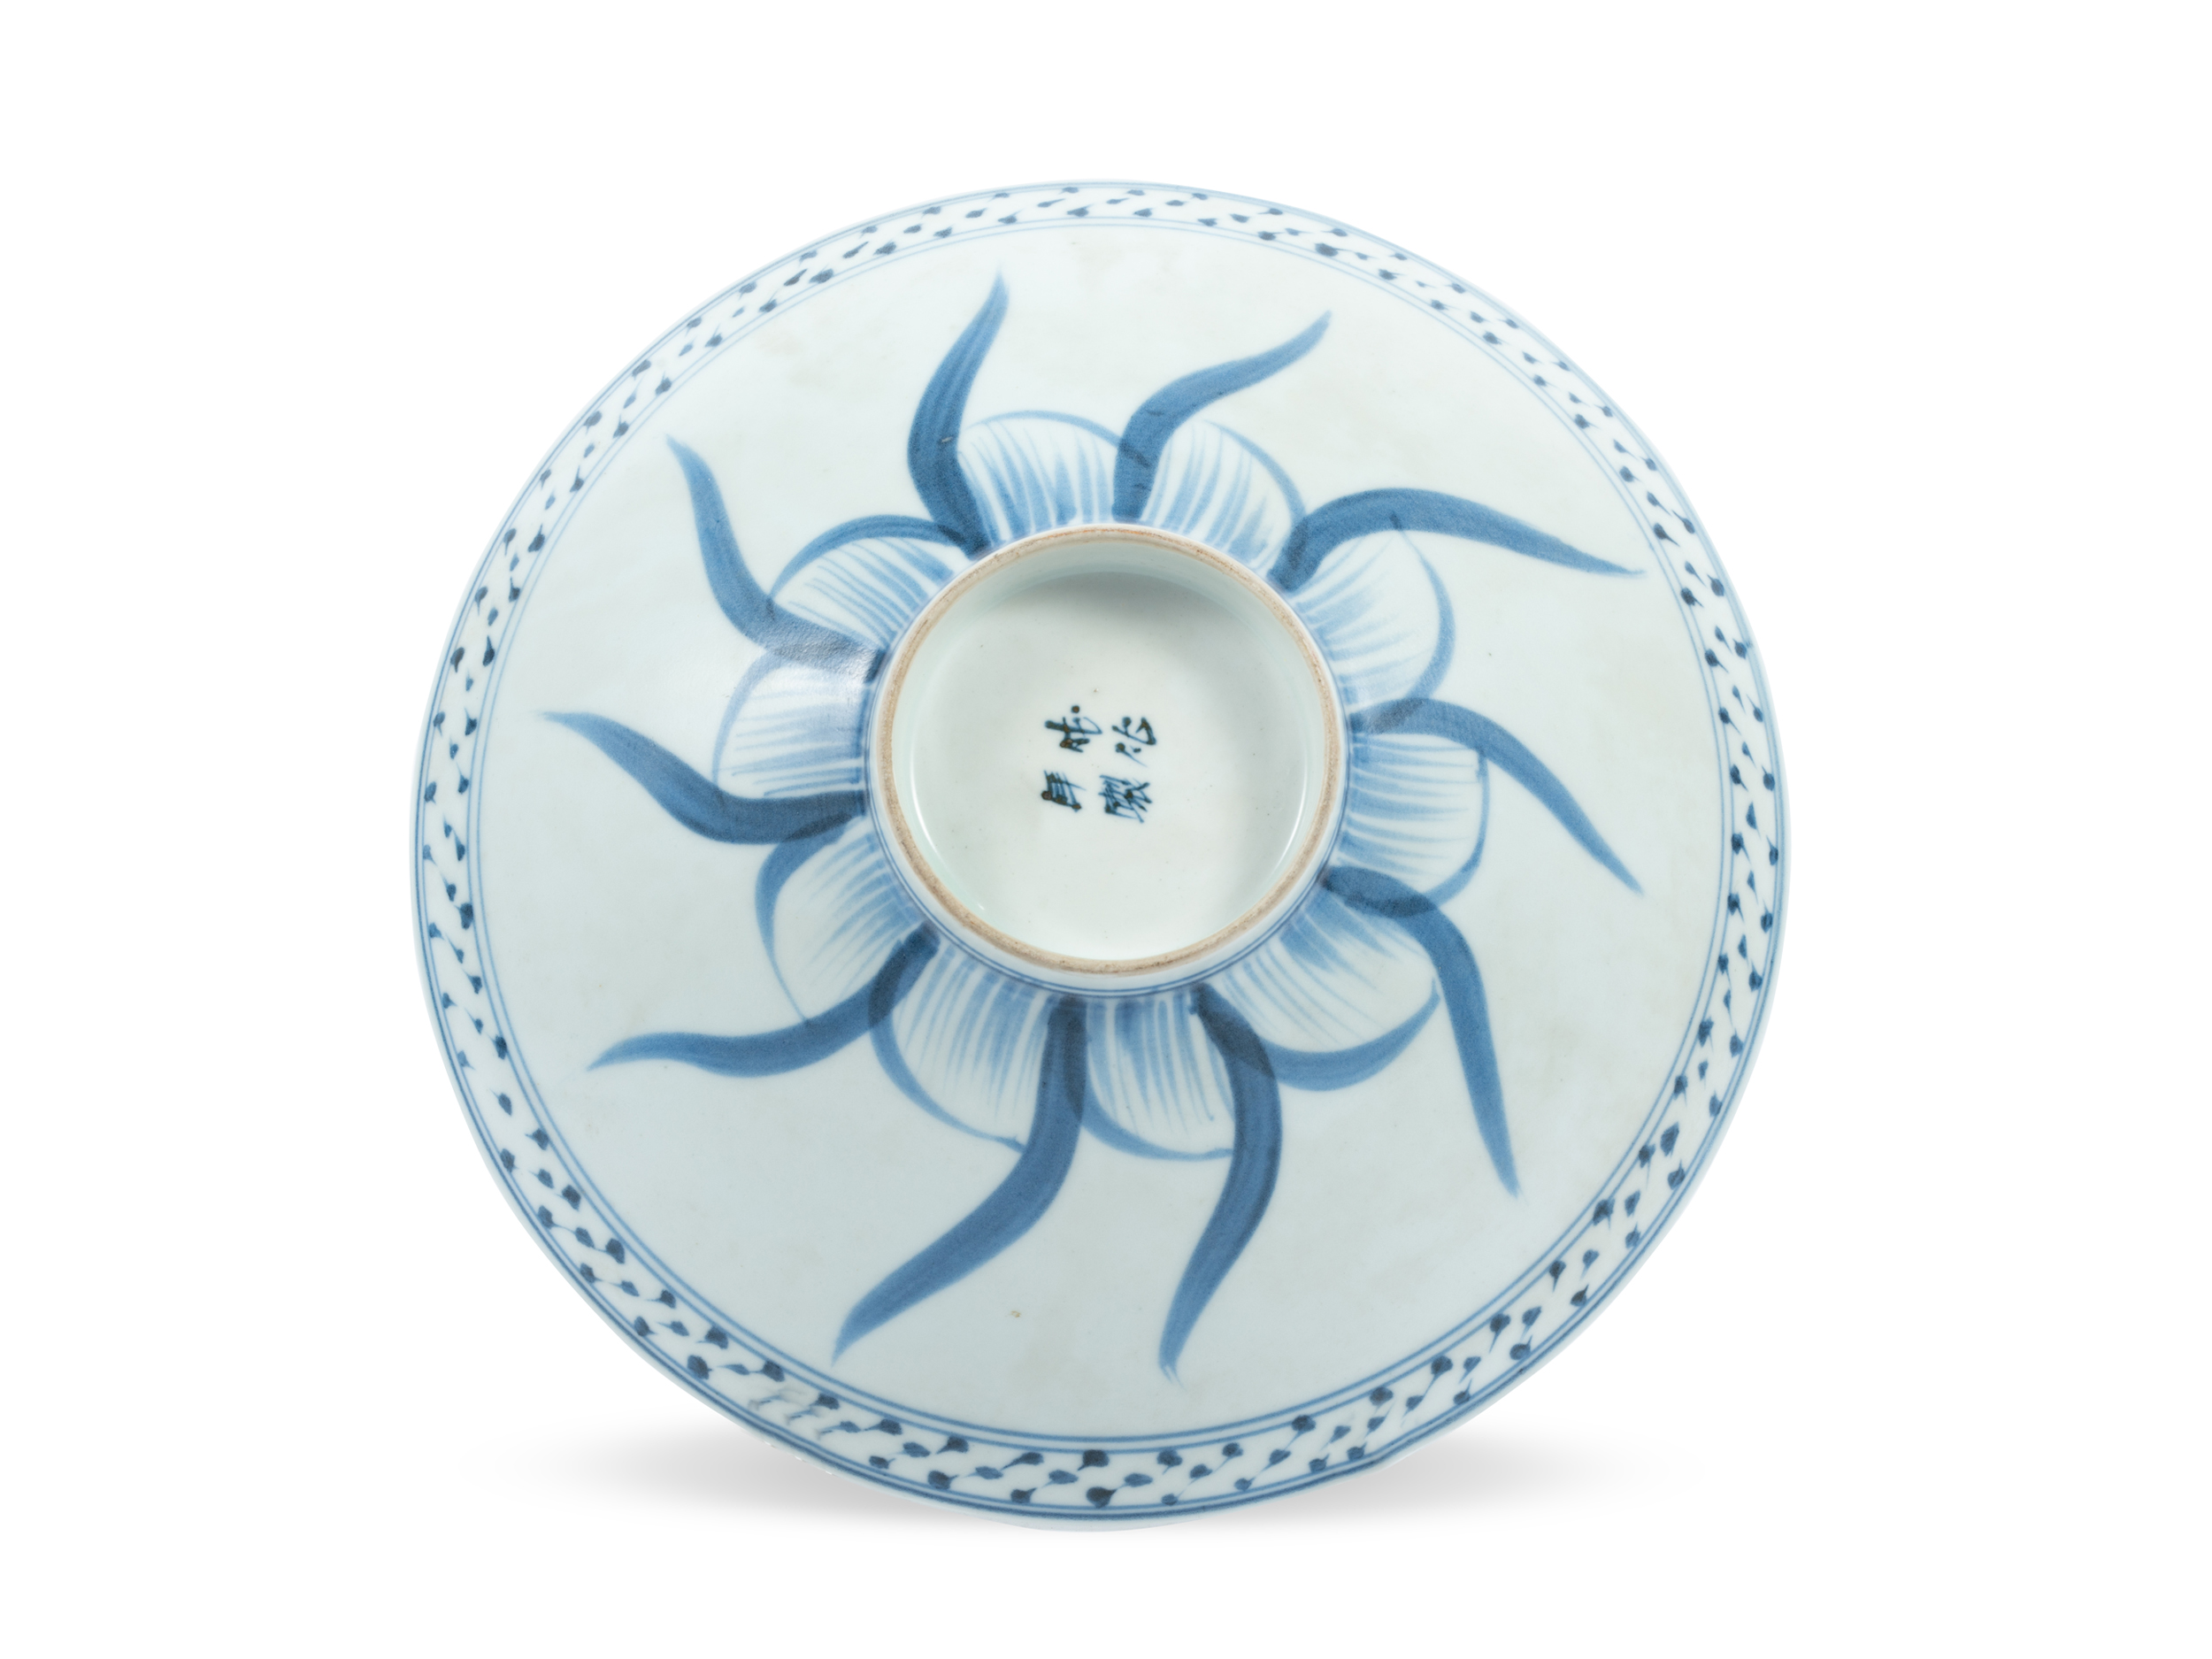 Plate, China, Blue and white porcelain - Image 2 of 2